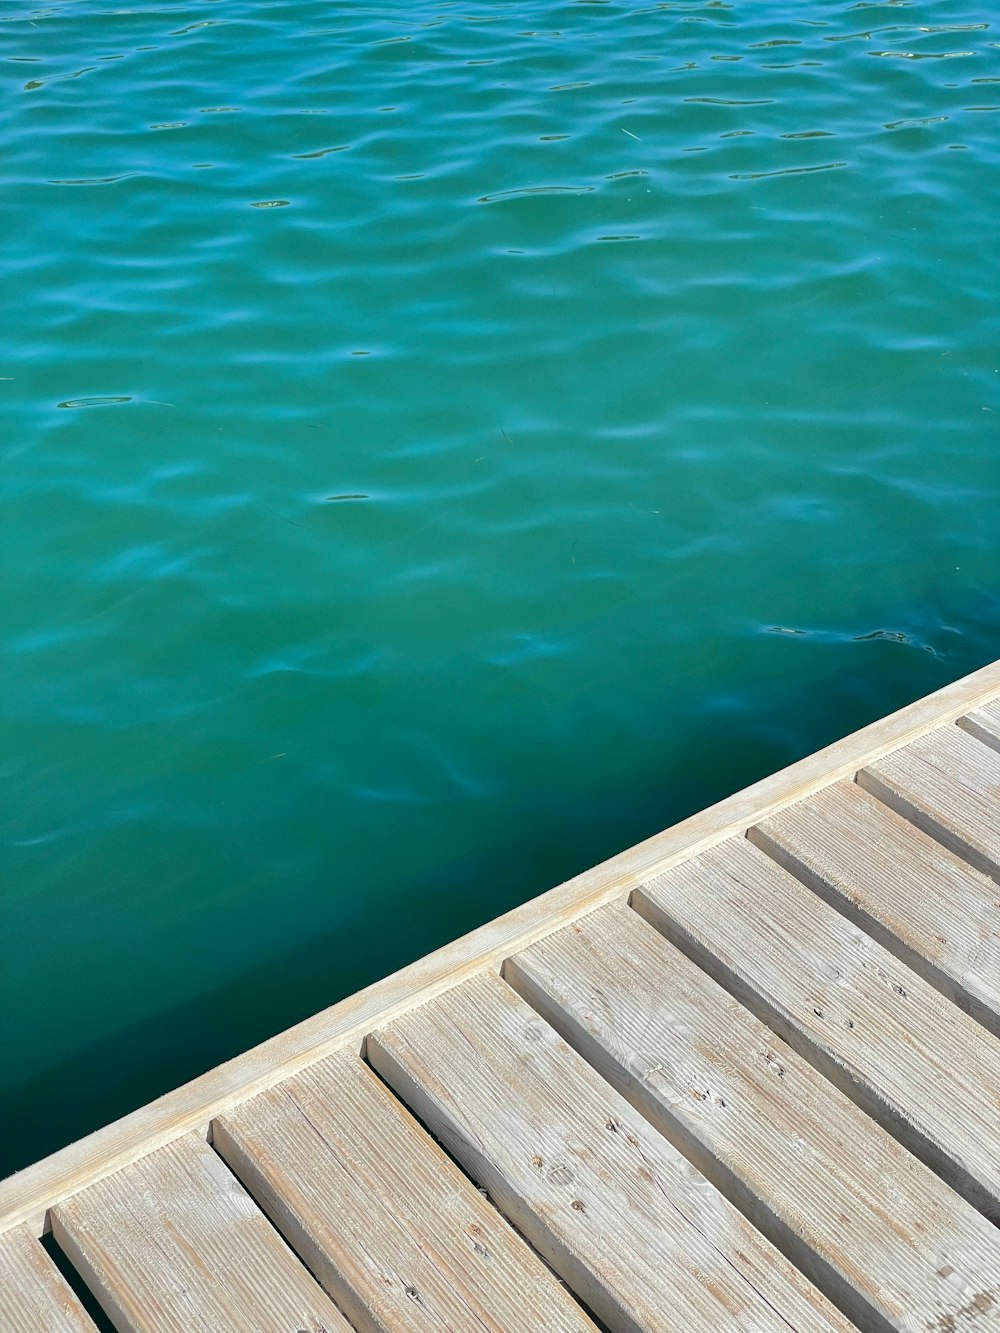 a wooden dock over a body of water